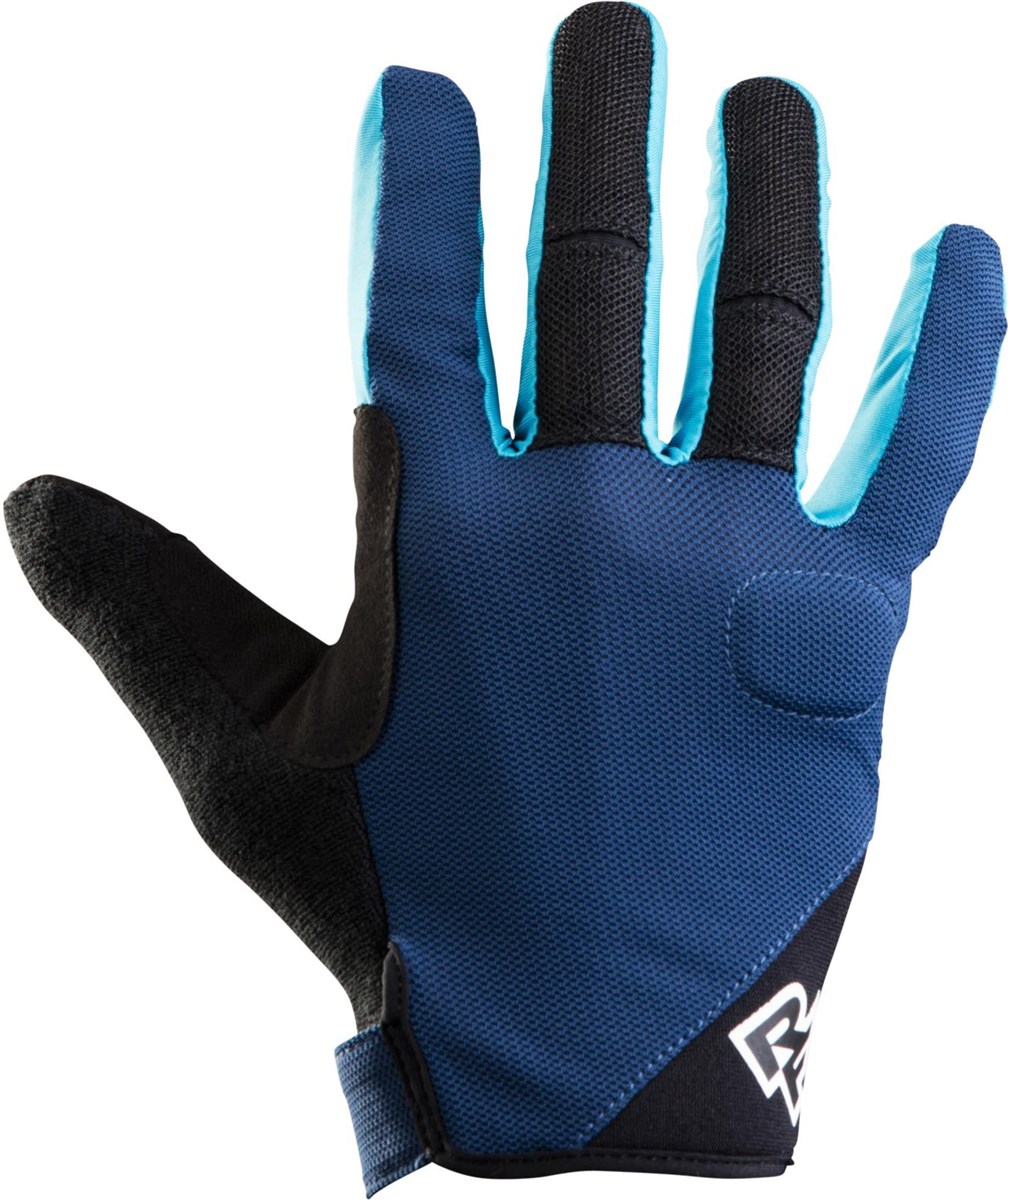 Race Face Trigger Gloves product image